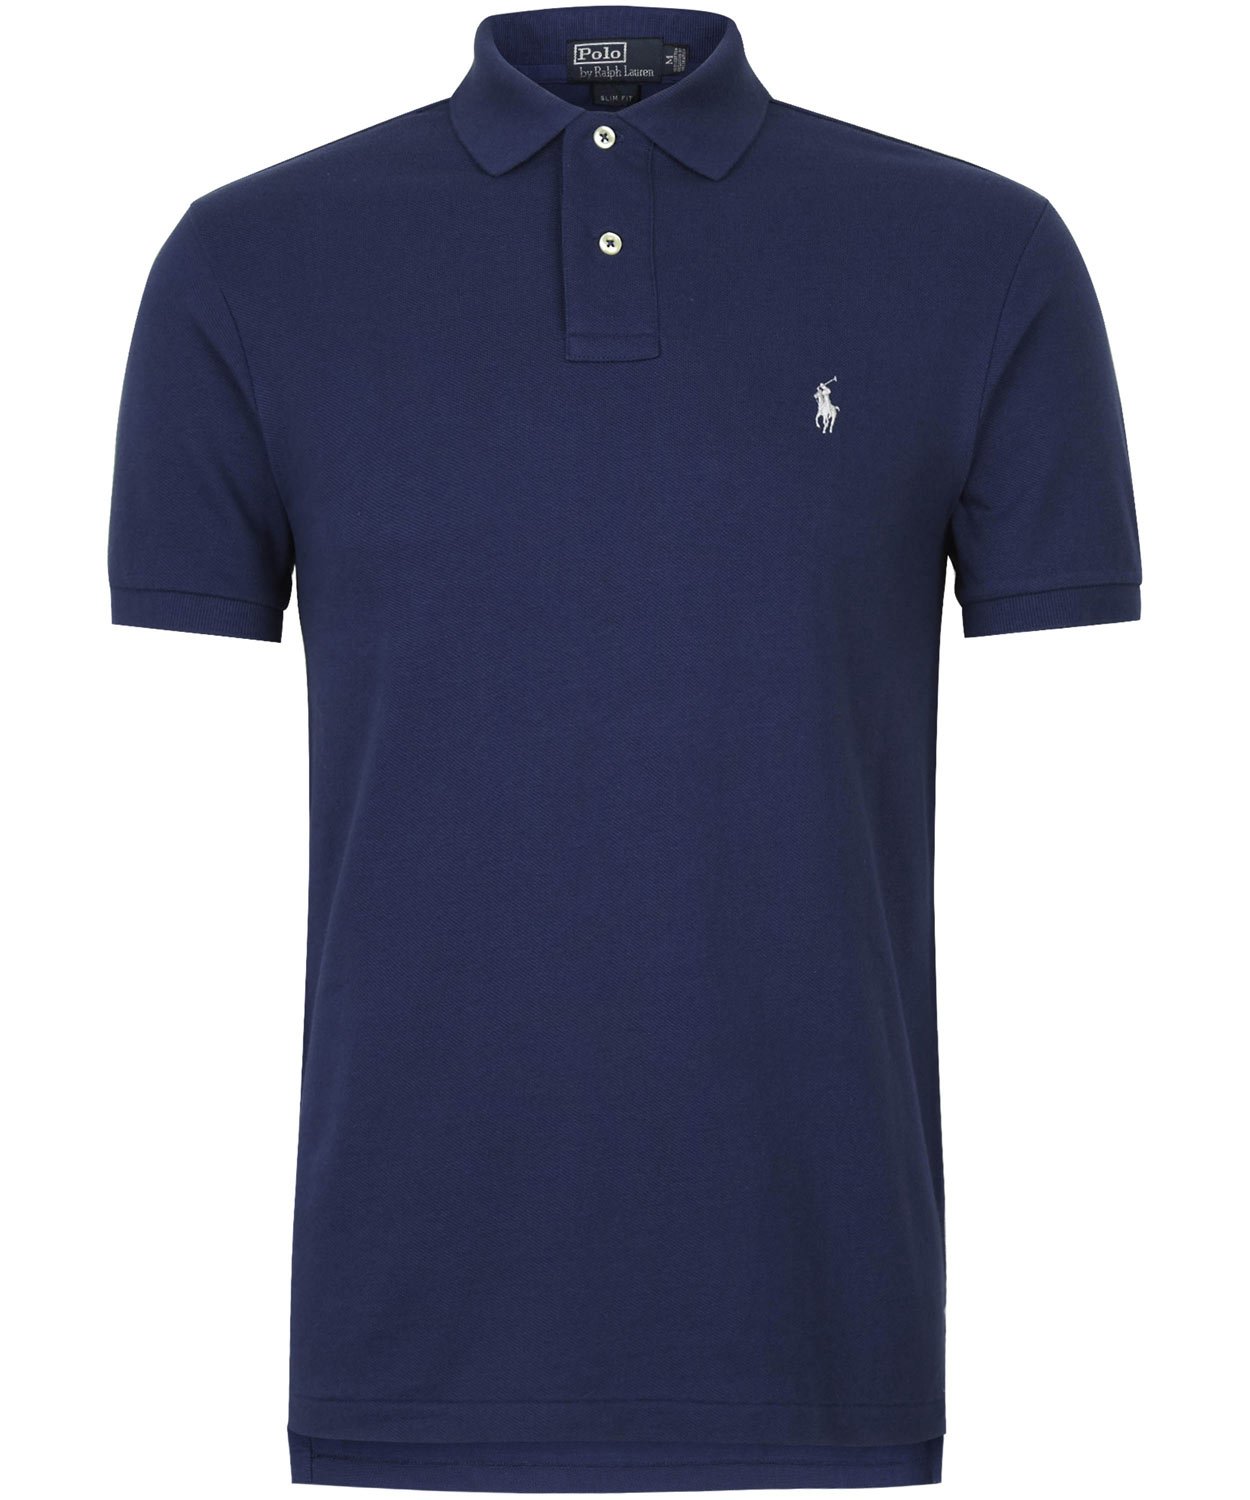 Lyst - Polo Ralph Lauren Navy Slim Fit Cotton Polo Shirt in Blue for Men